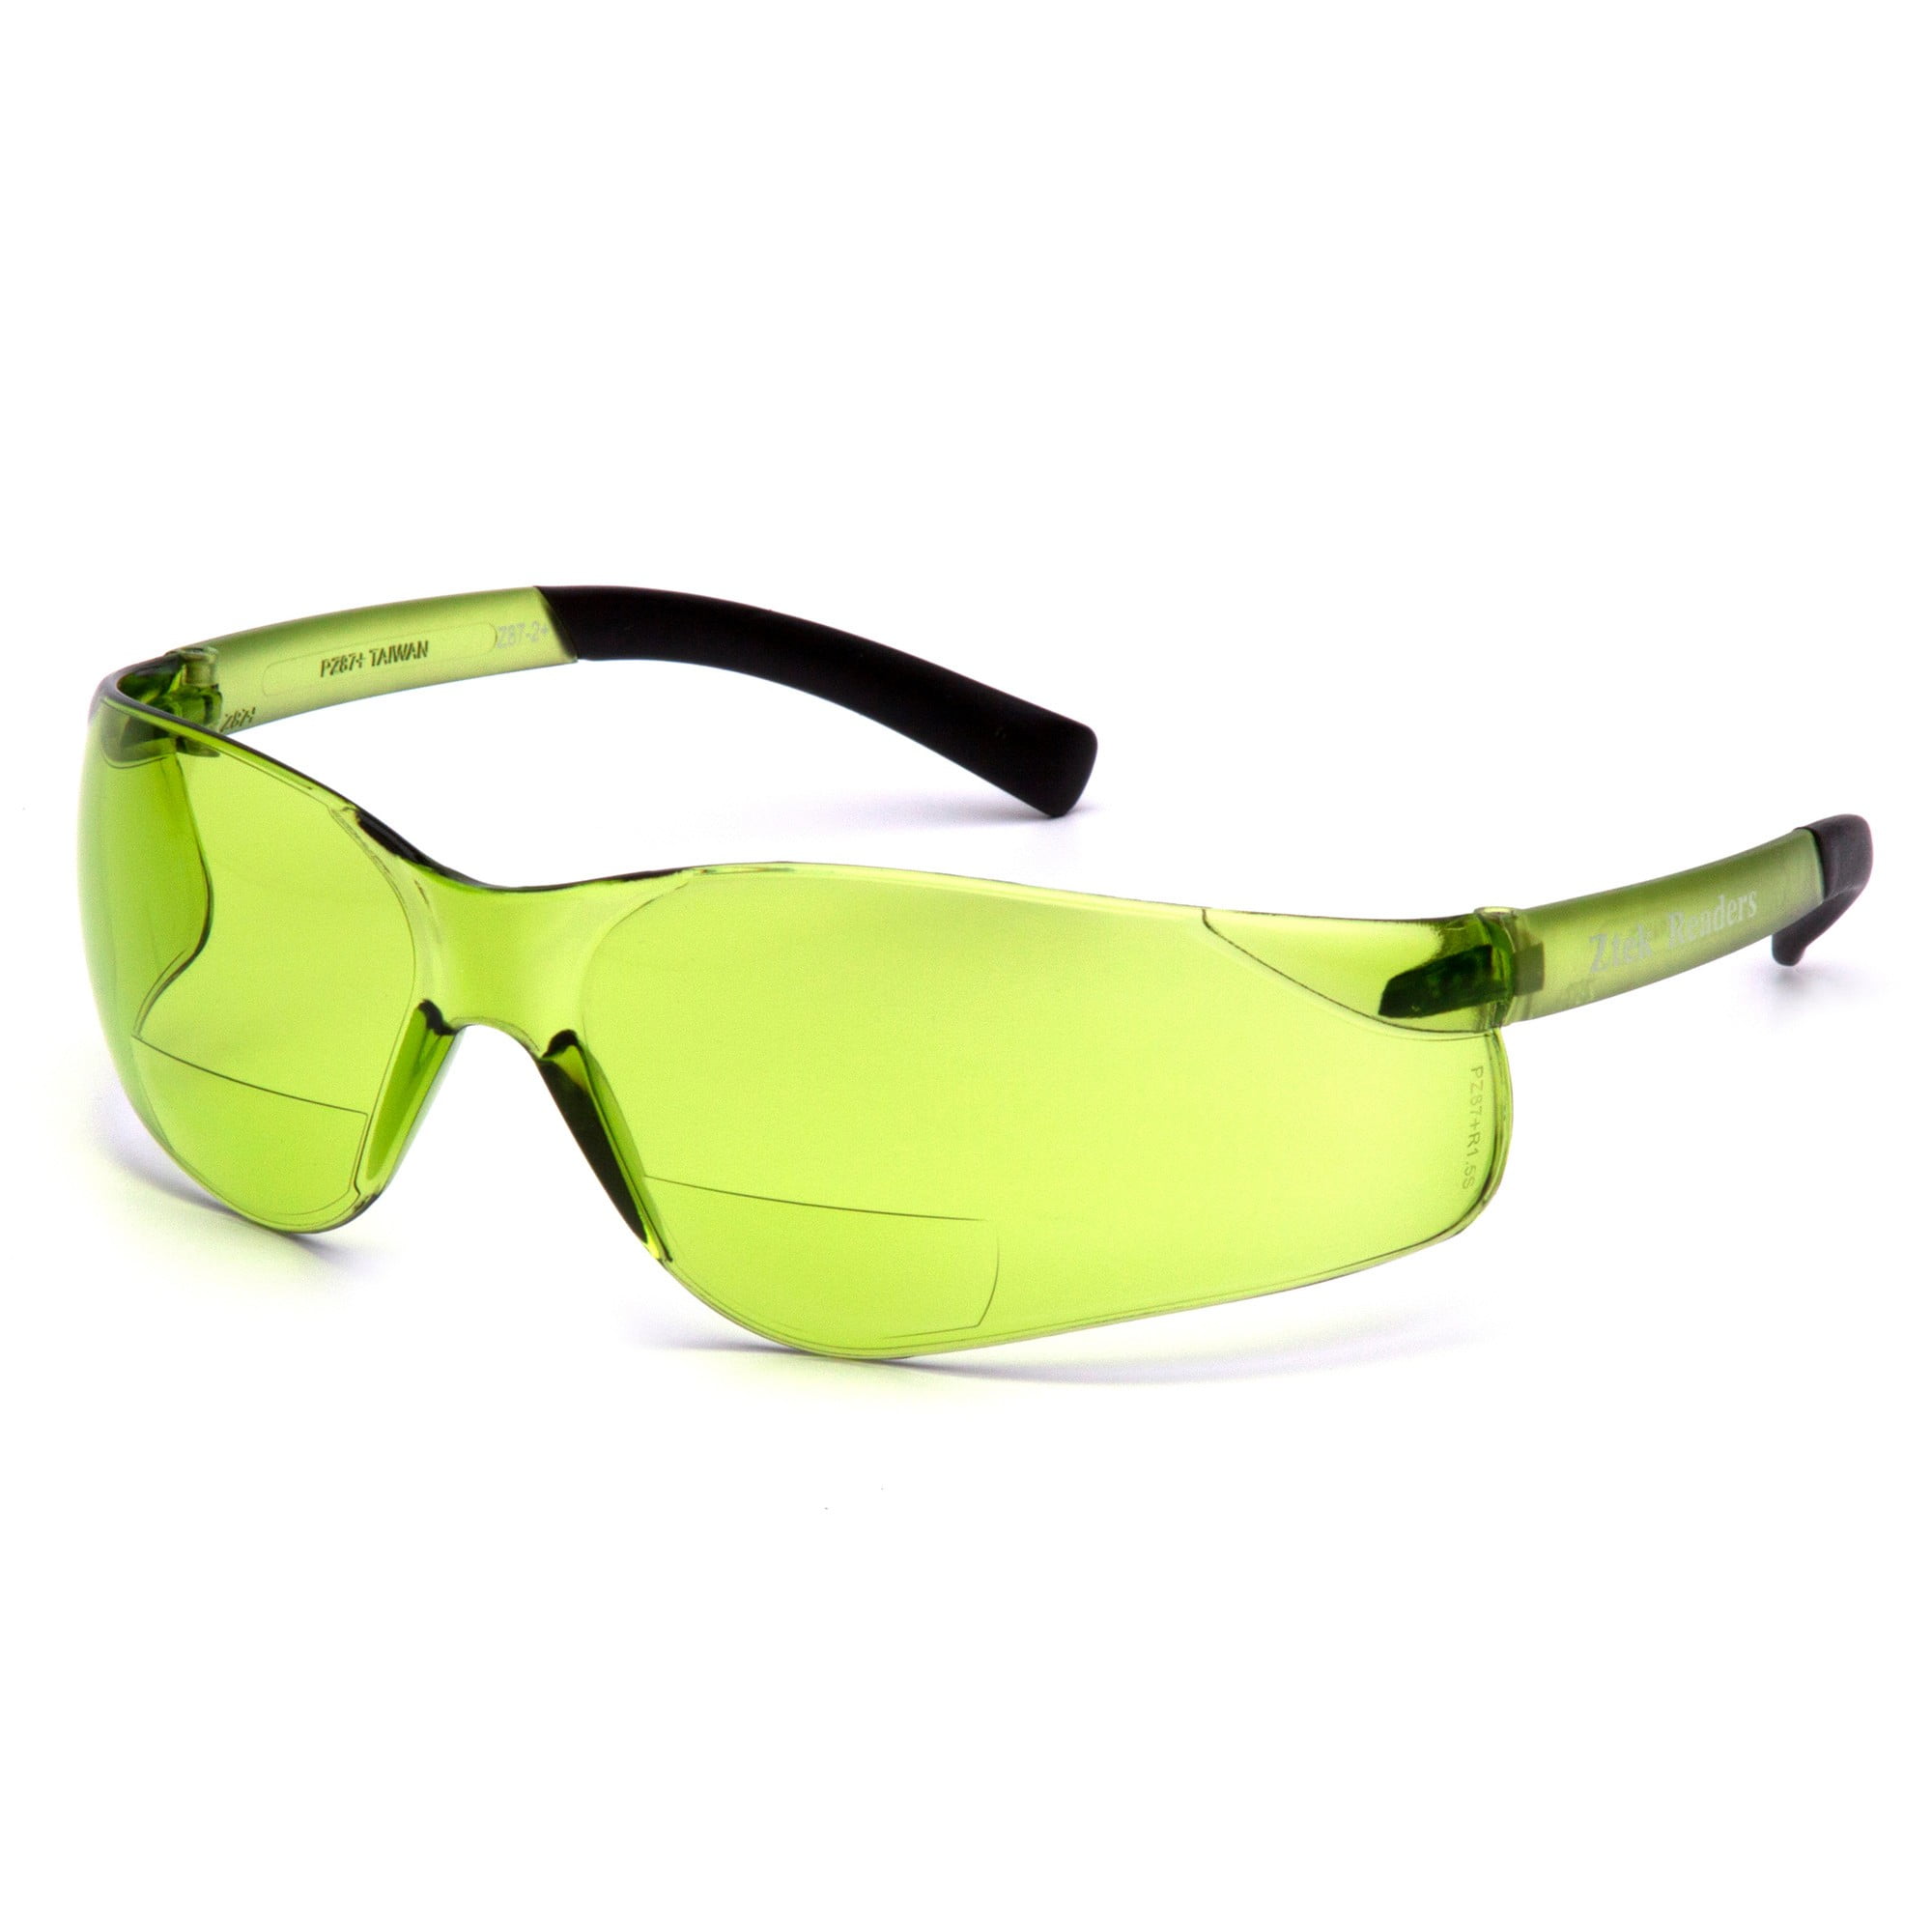 Details about   Cabot Safety Safety Glasses Clear Lenses Bright Green Earpieces 